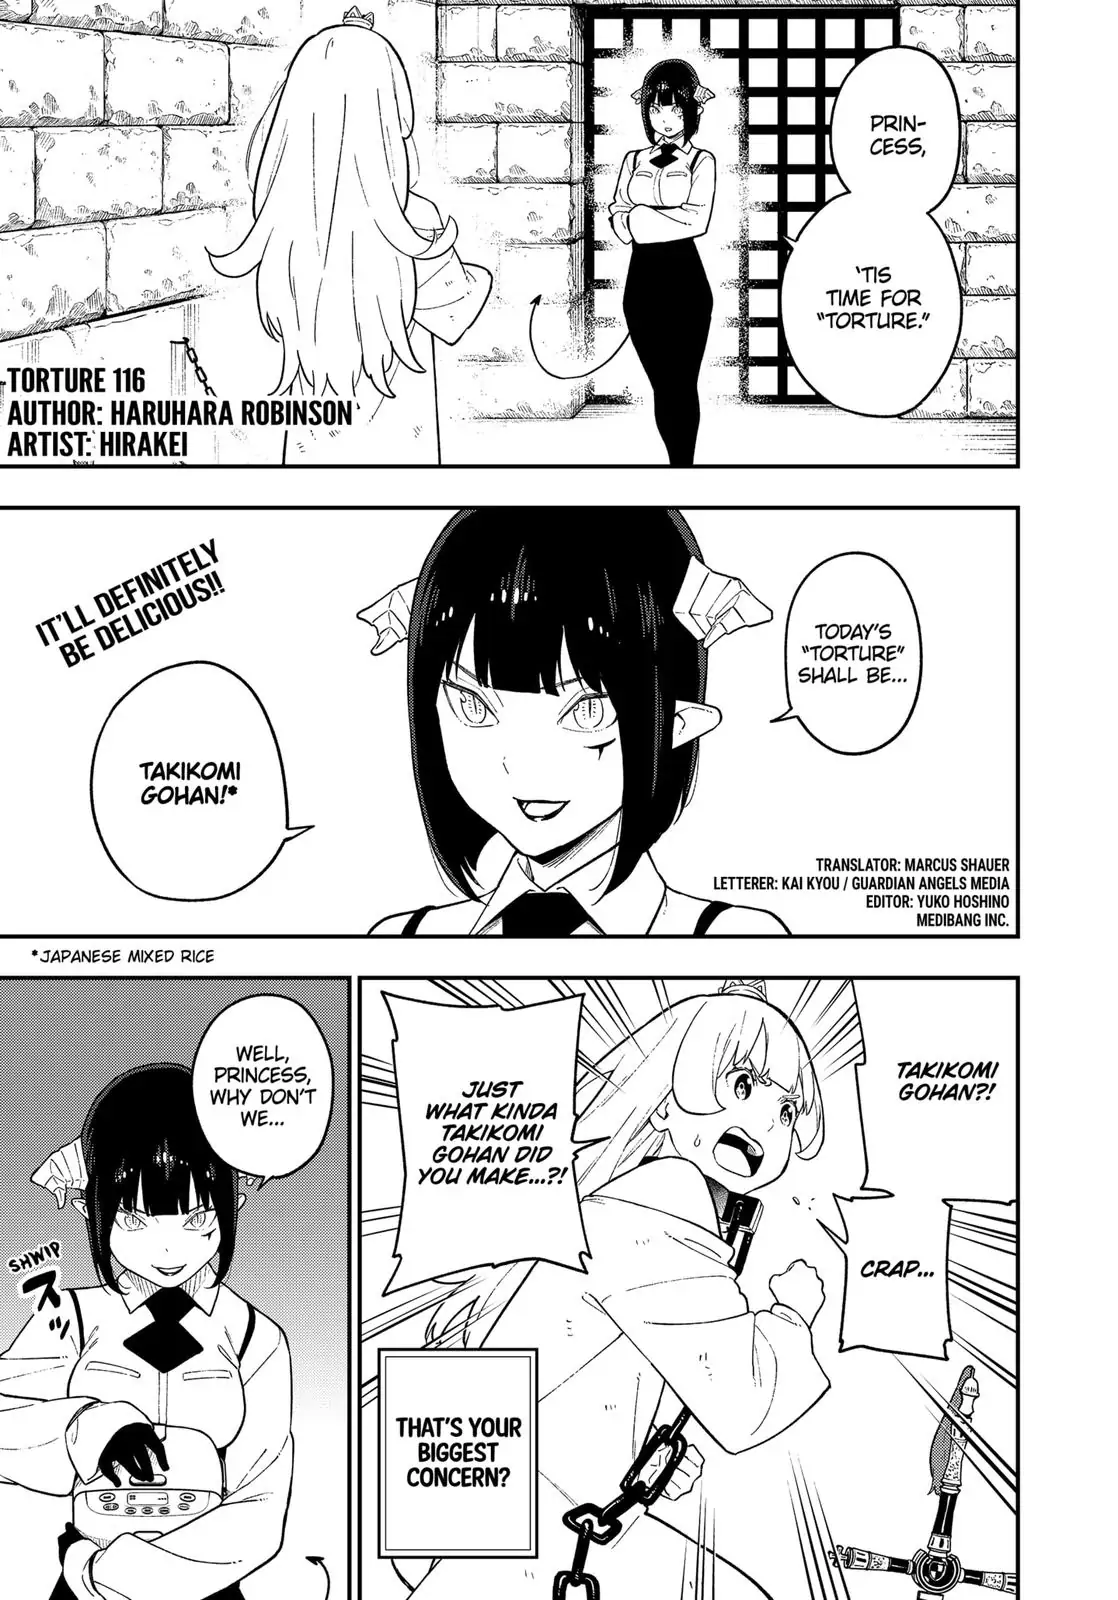 It's Time for "Interrogation", Princess! - chapter 116 - #1